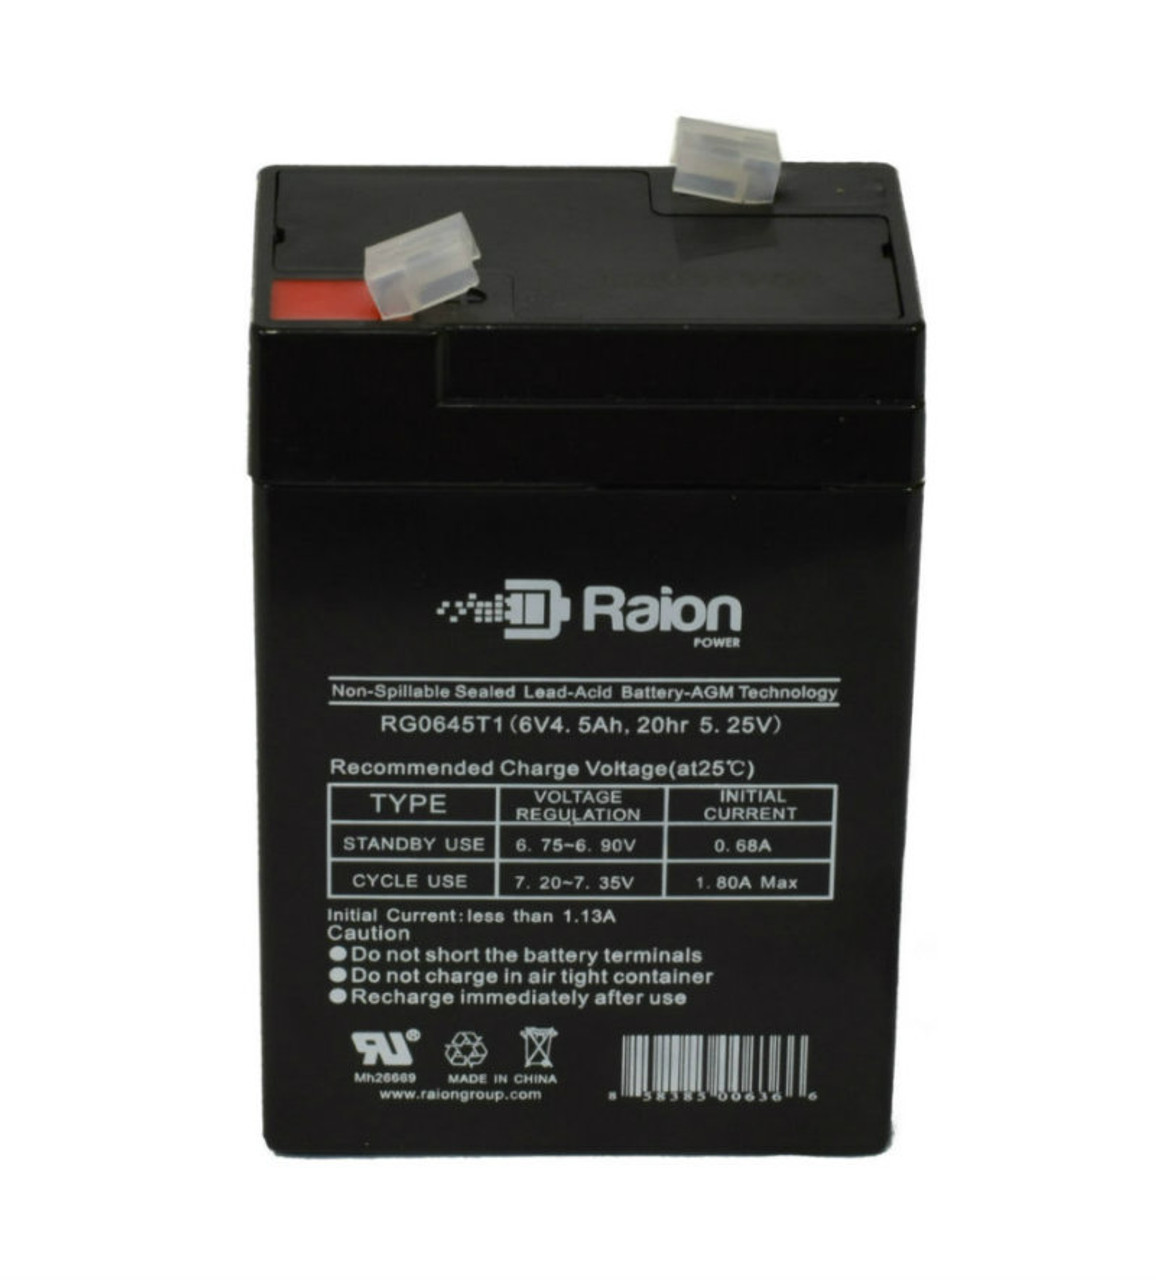 Raion Power RG0645T1 Replacement Battery Cartridge for Expocell P206/40